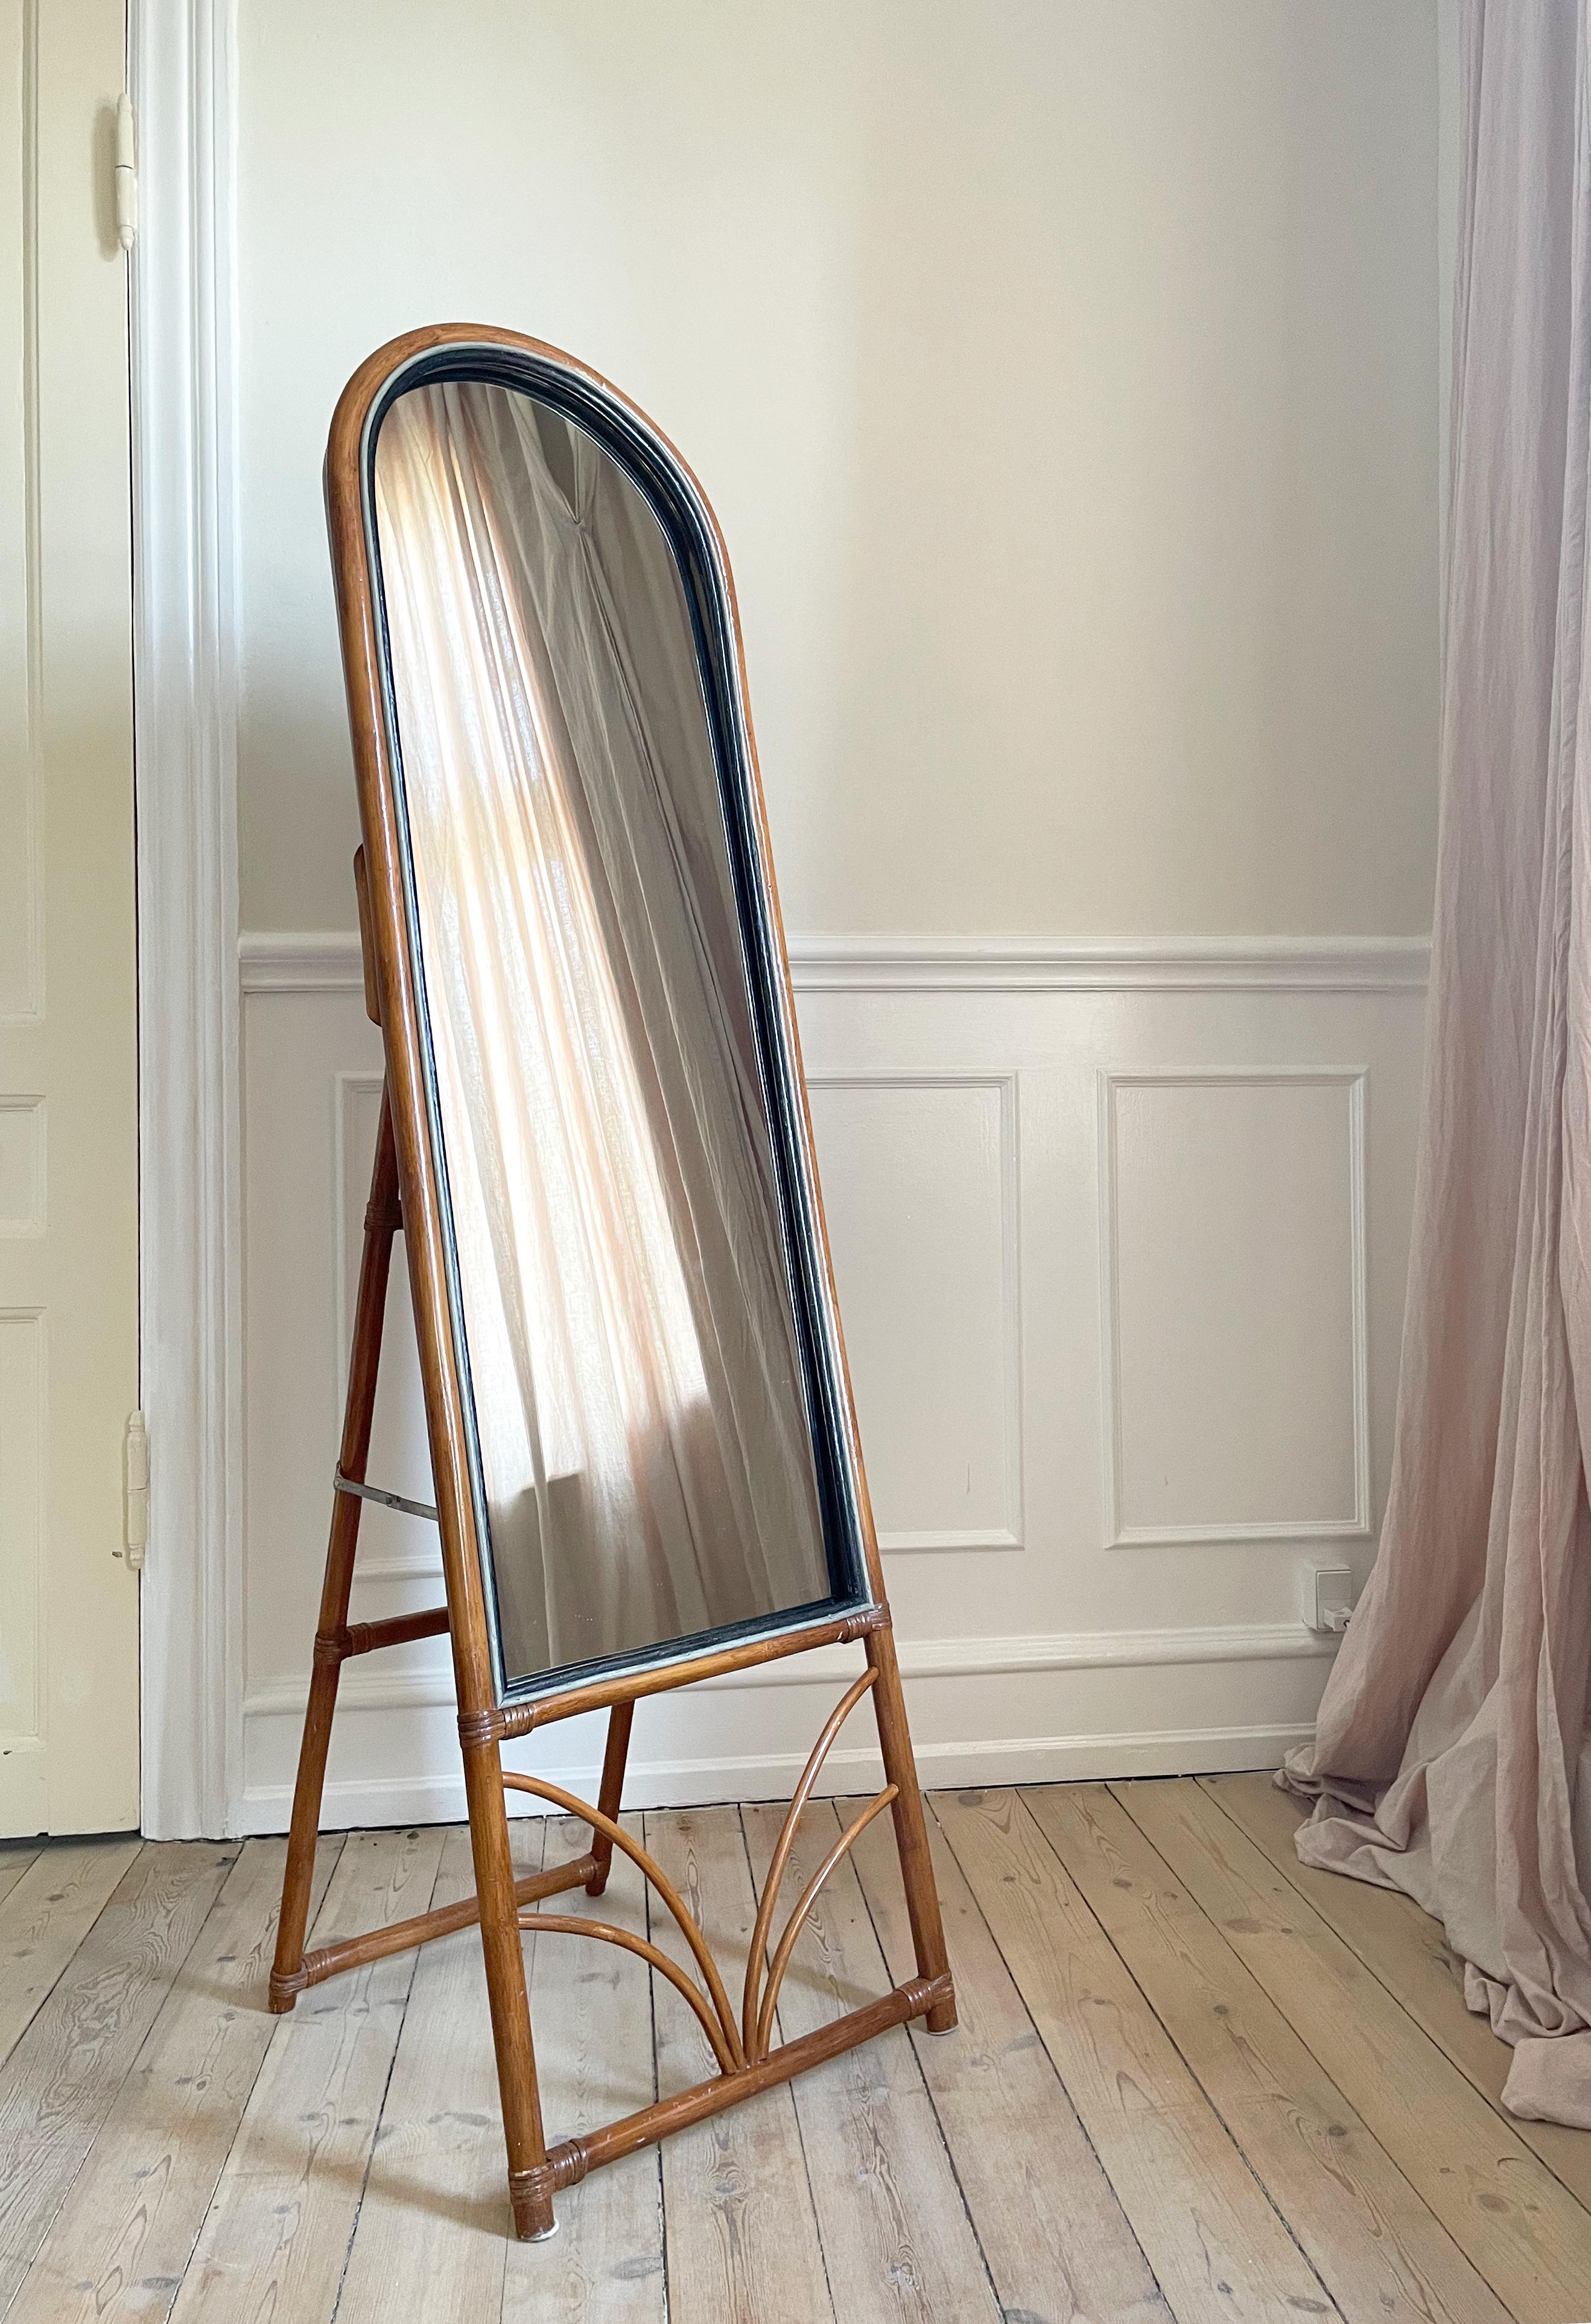 Italian midcentury floor mirror in the style of Vivai del Sud. Wooden arched frame with soft Art Deco style lacquered bamboo decorations underneath and around the mirror. Singular front bamboo canes painted black and light grey around the mirror.